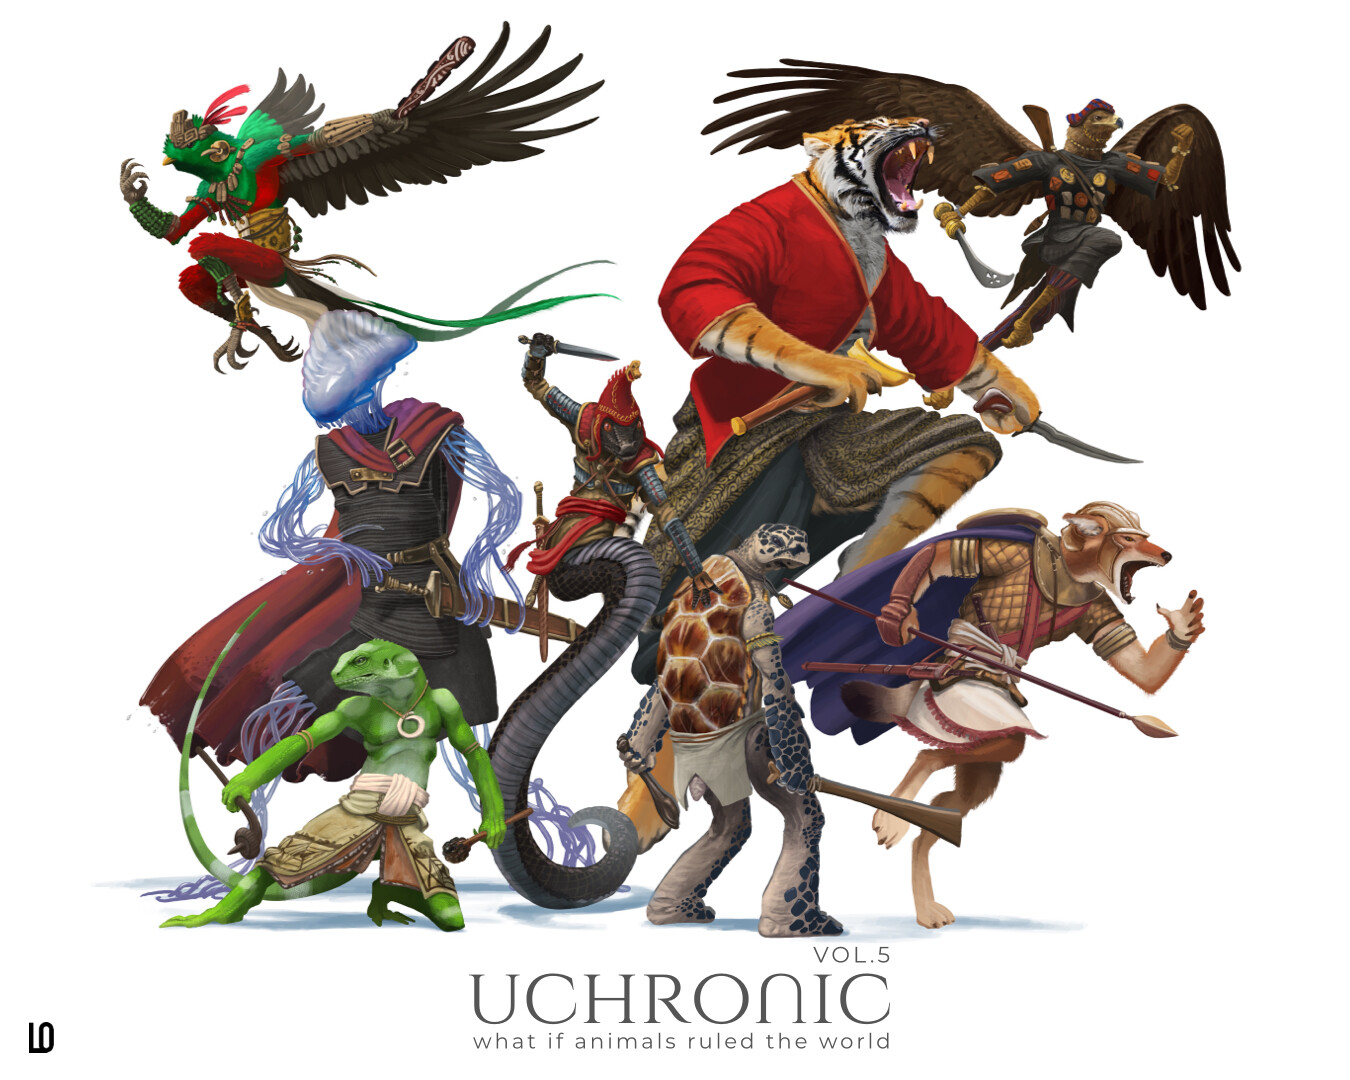 The eight characters from Uchronic Vol.5 reunited!